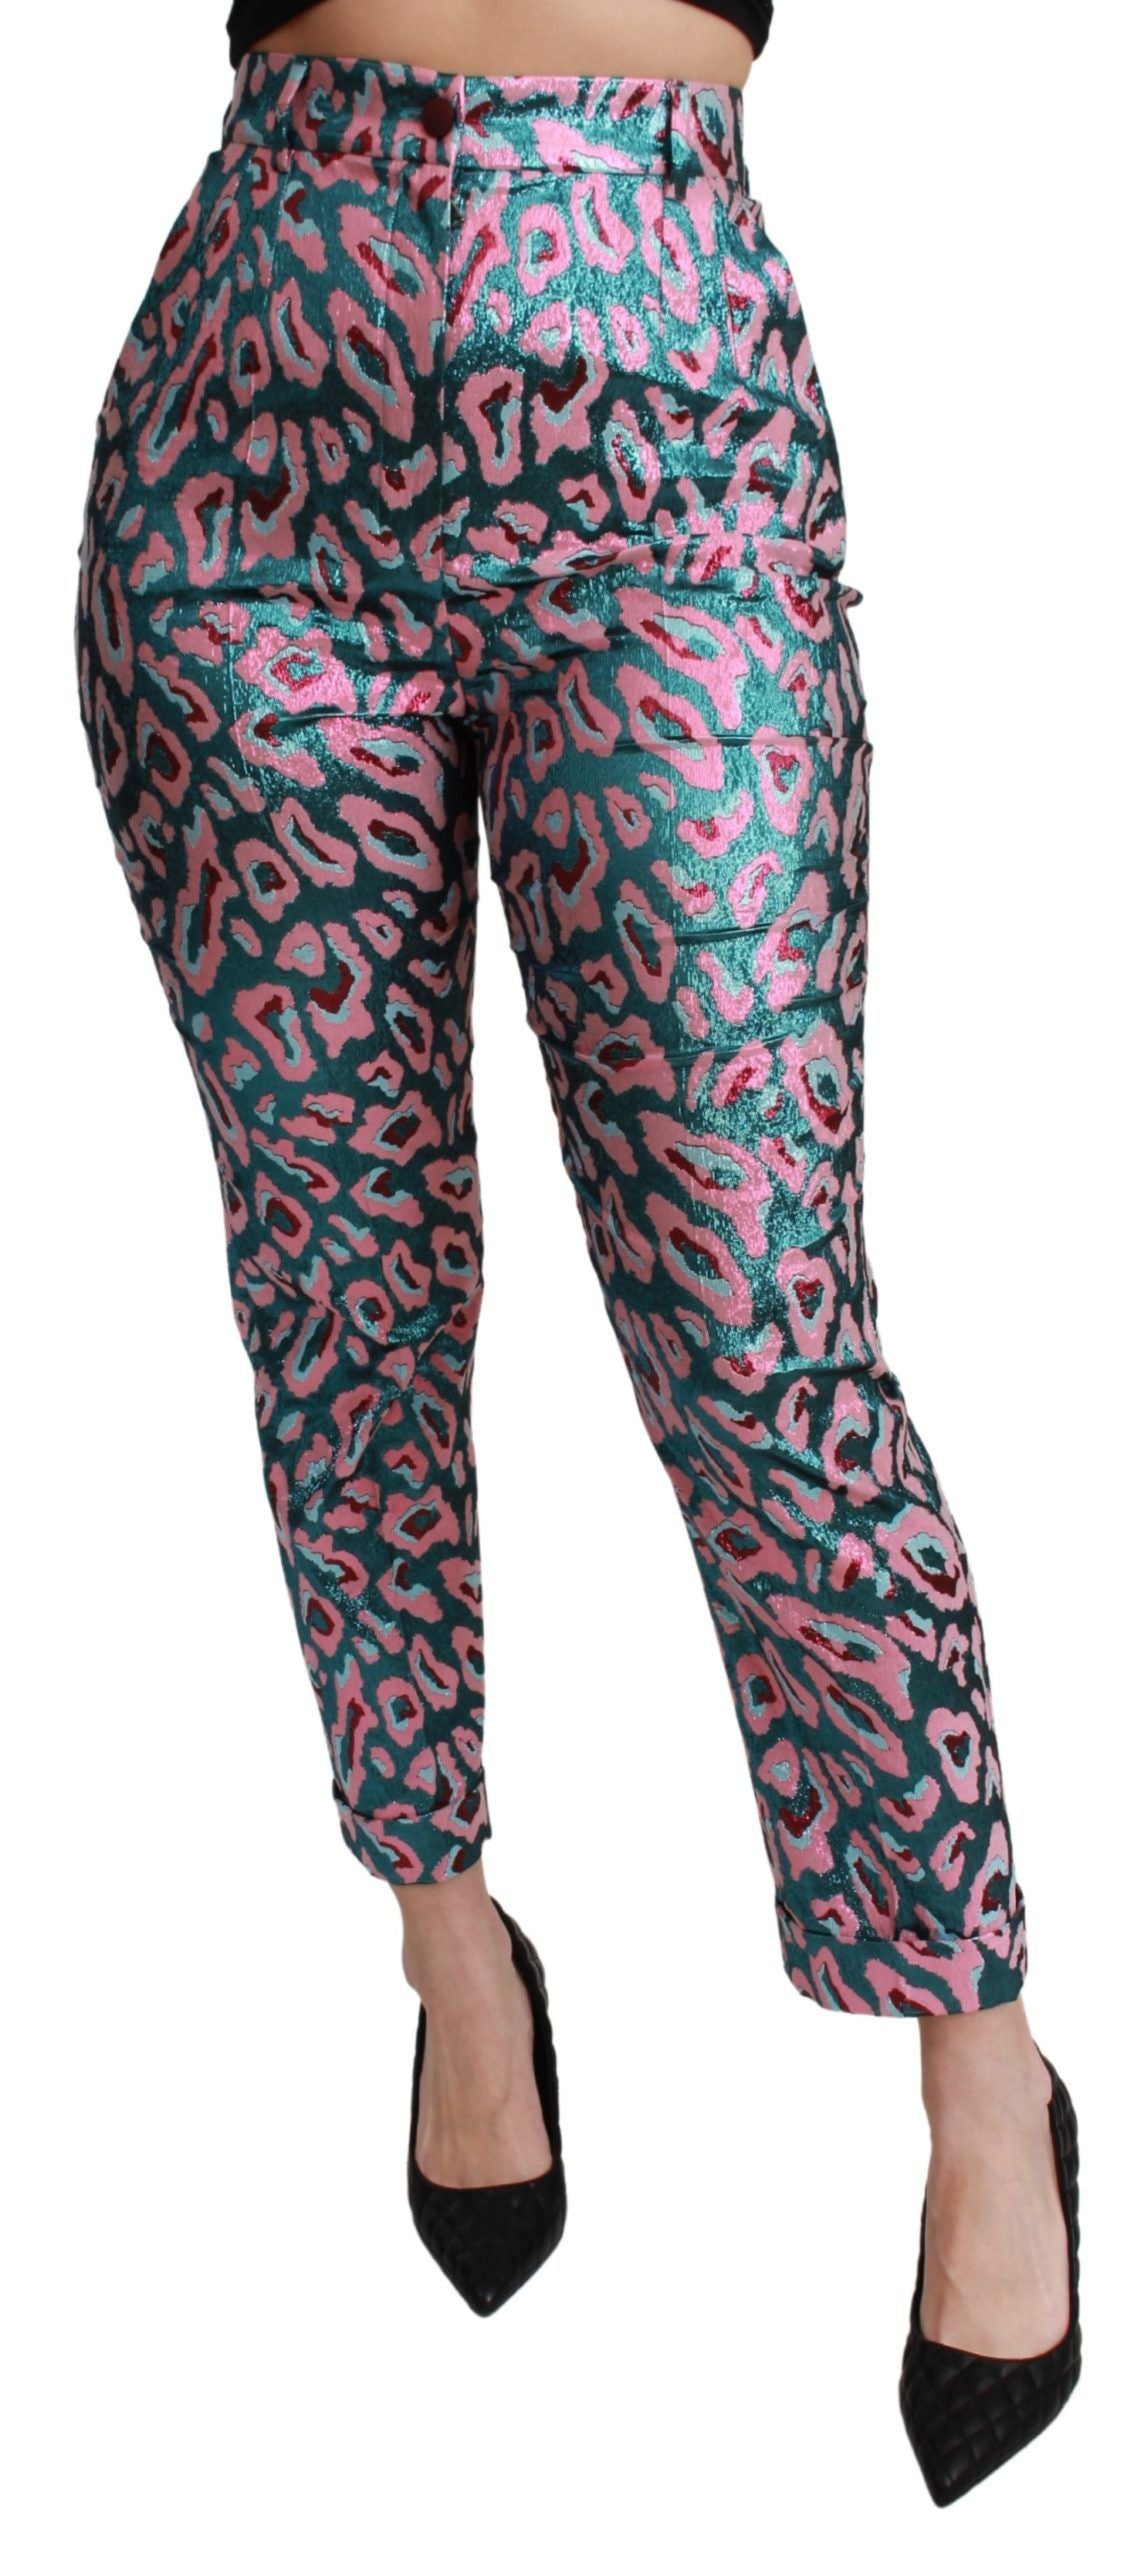 Multicolor Patterned Cropped High Waist Pants